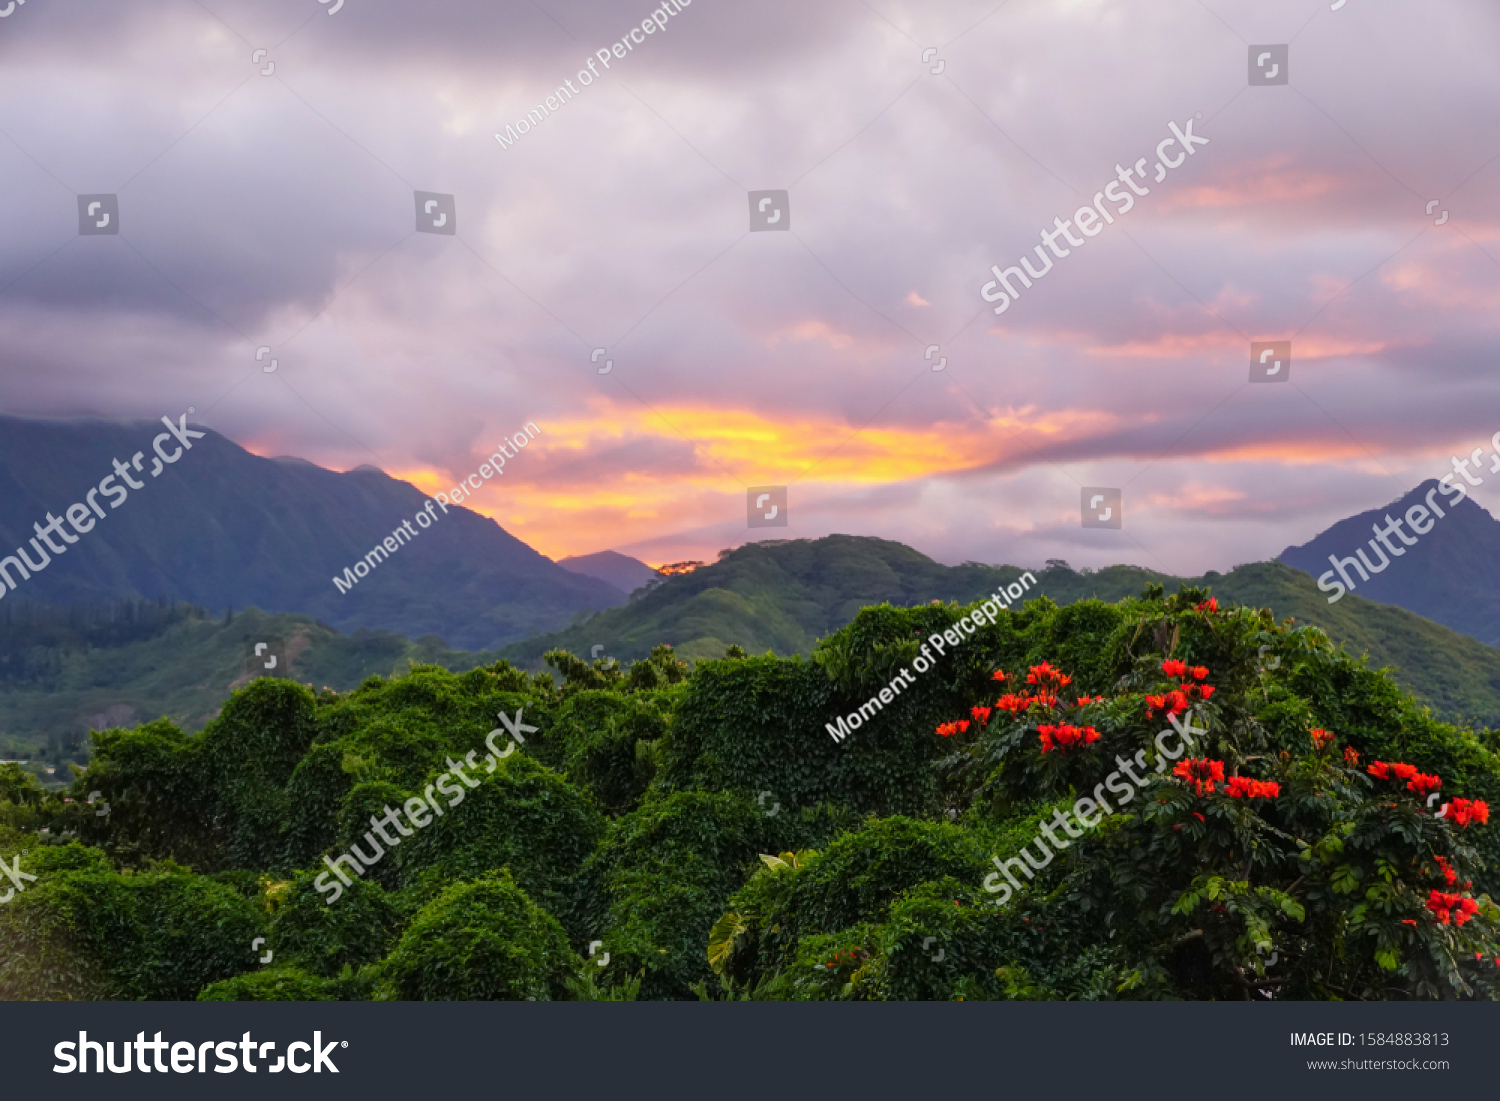 The plants, vines, and flowers of the Hawaiian rainforest glow in the sunset light. The Koolau mountain range makes a beautiful background. #1584883813